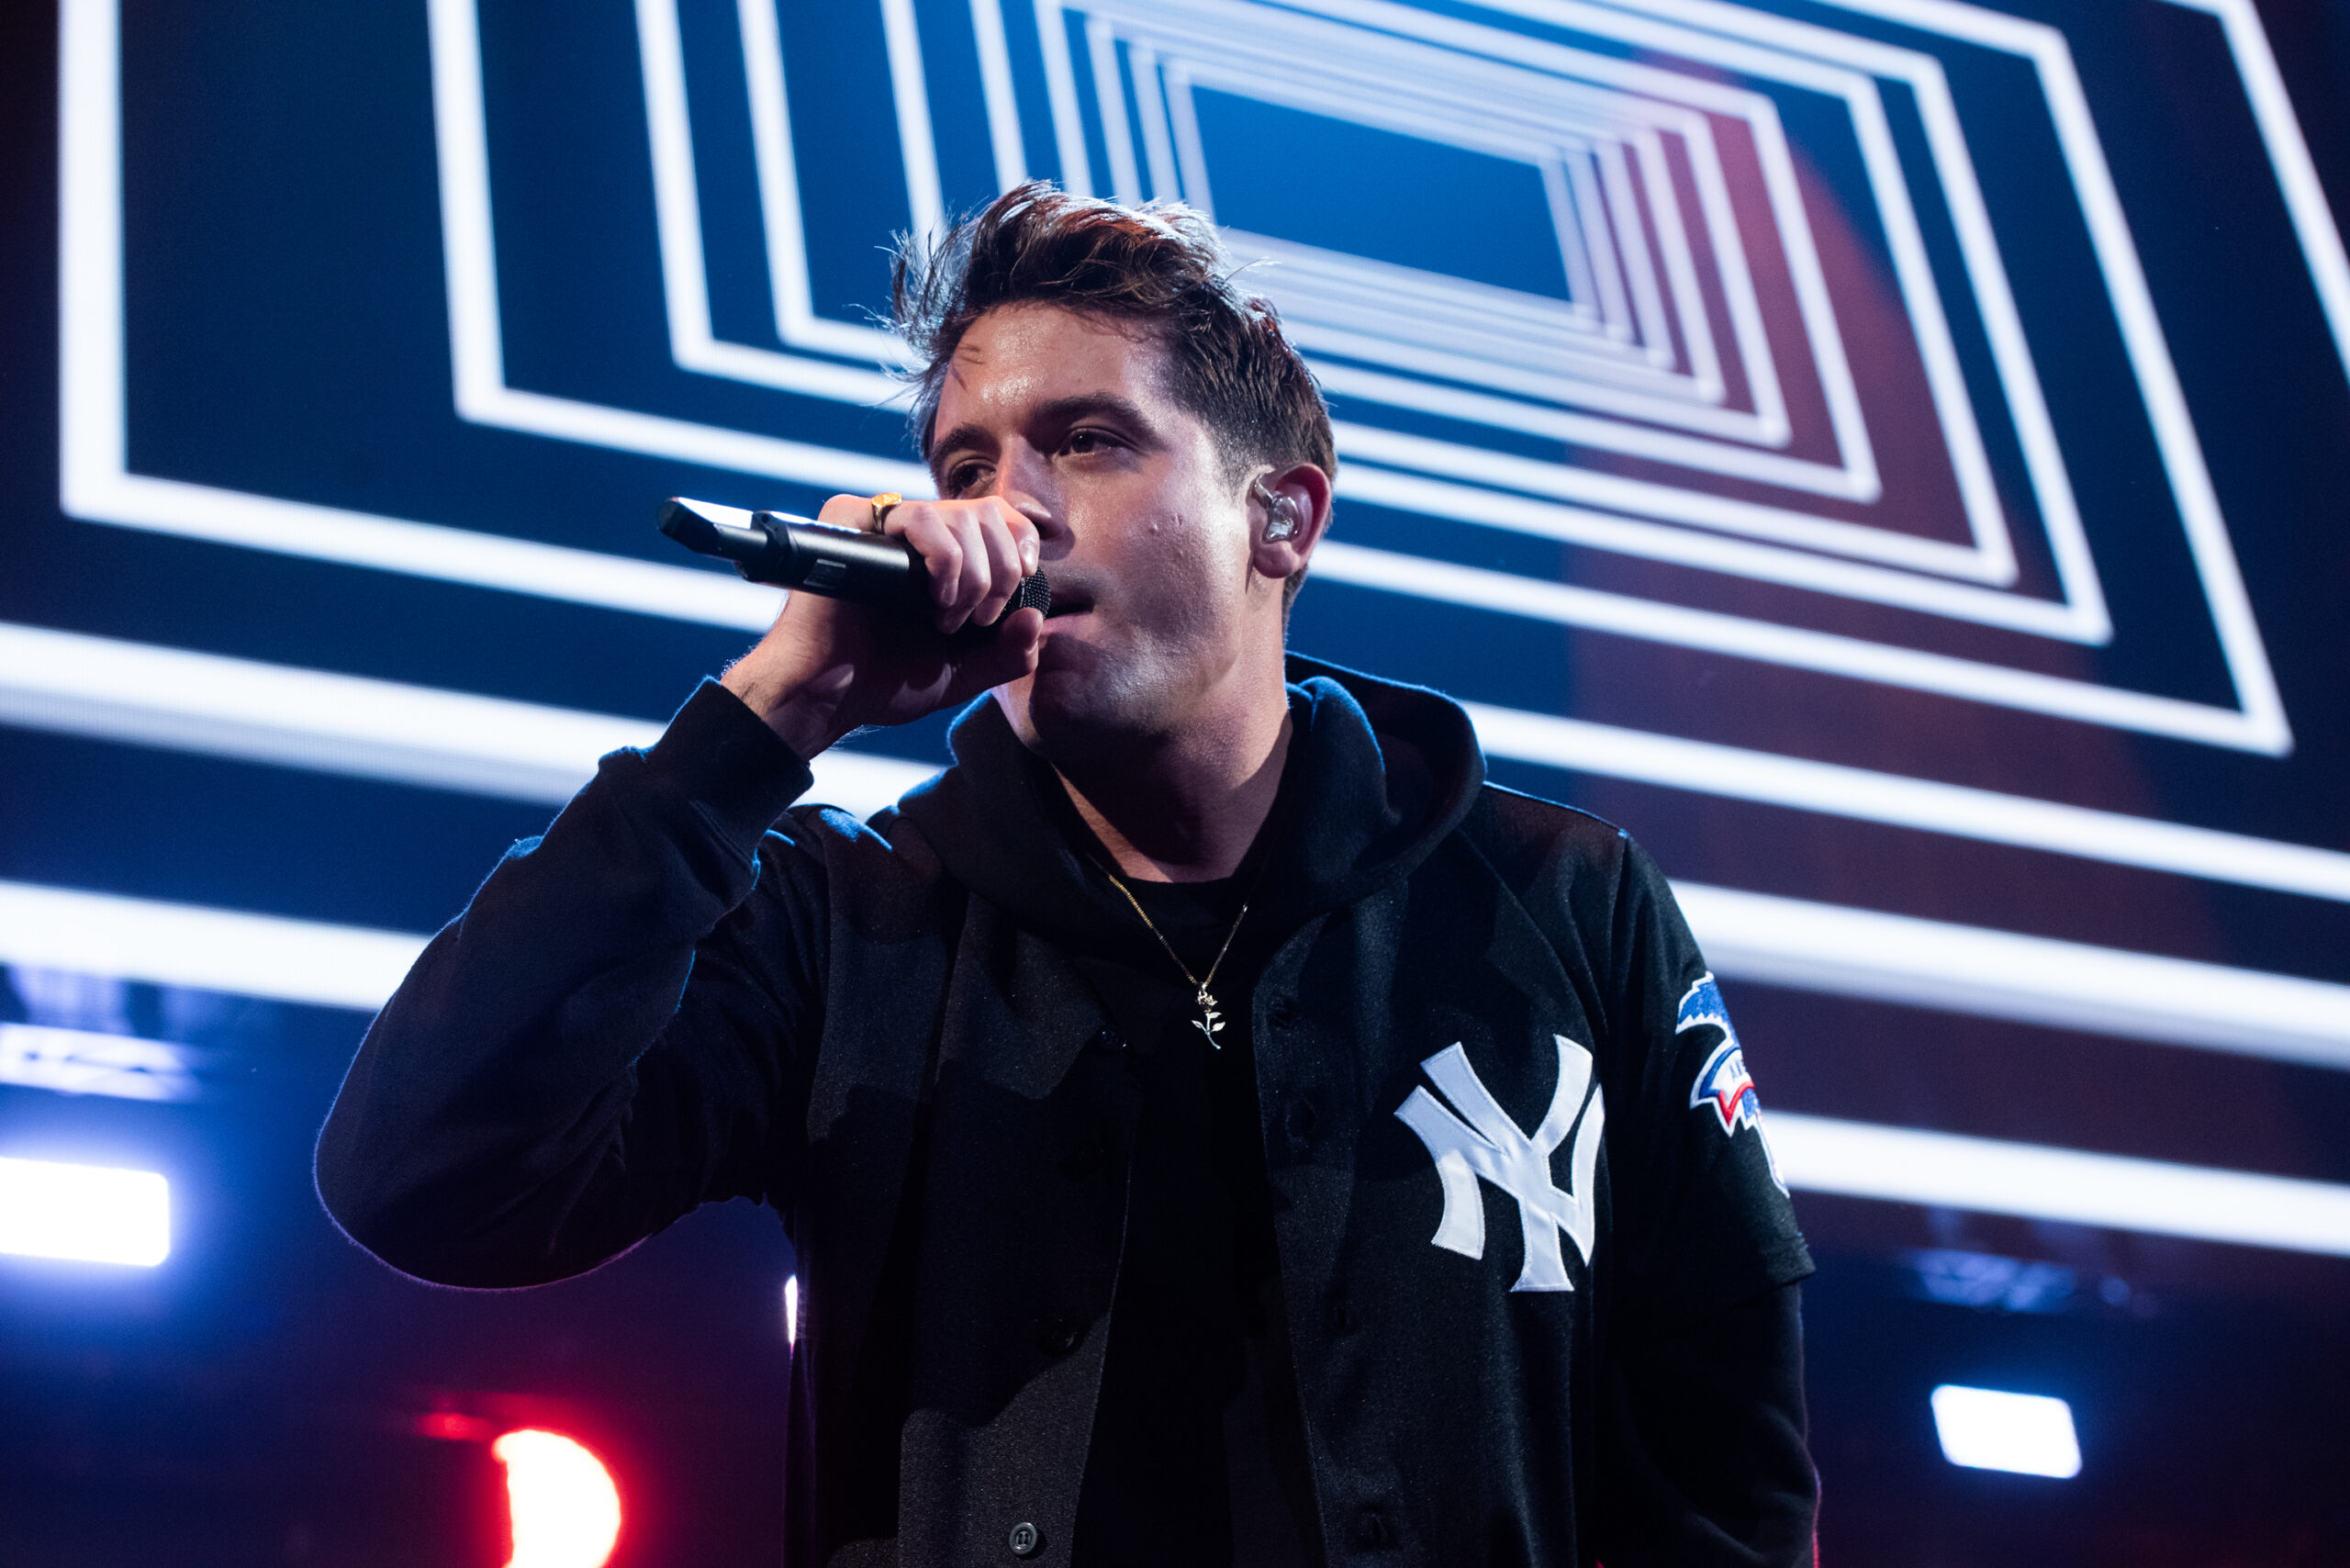 G-Eazy Says He’s Going To “Reclaim” His Spot In Hip-Hop